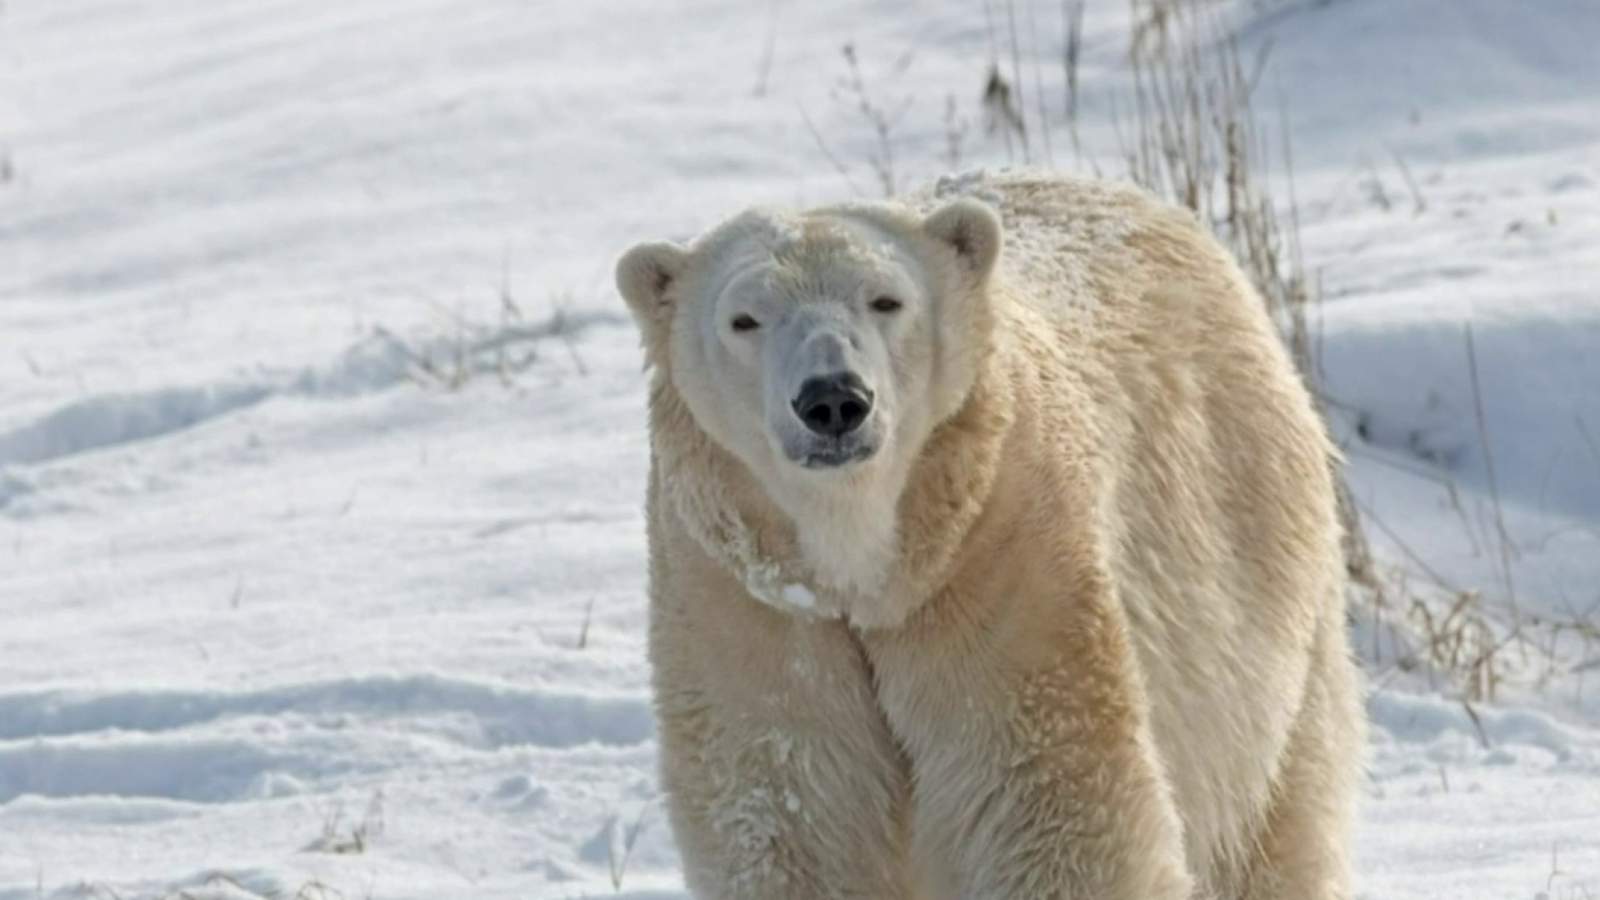 Nightside Report Feb. 9, 2021: Detroit Zoo staff shocked after polar bear killed, New Oakland County human trafficking unit makes arrests in Madison Heights